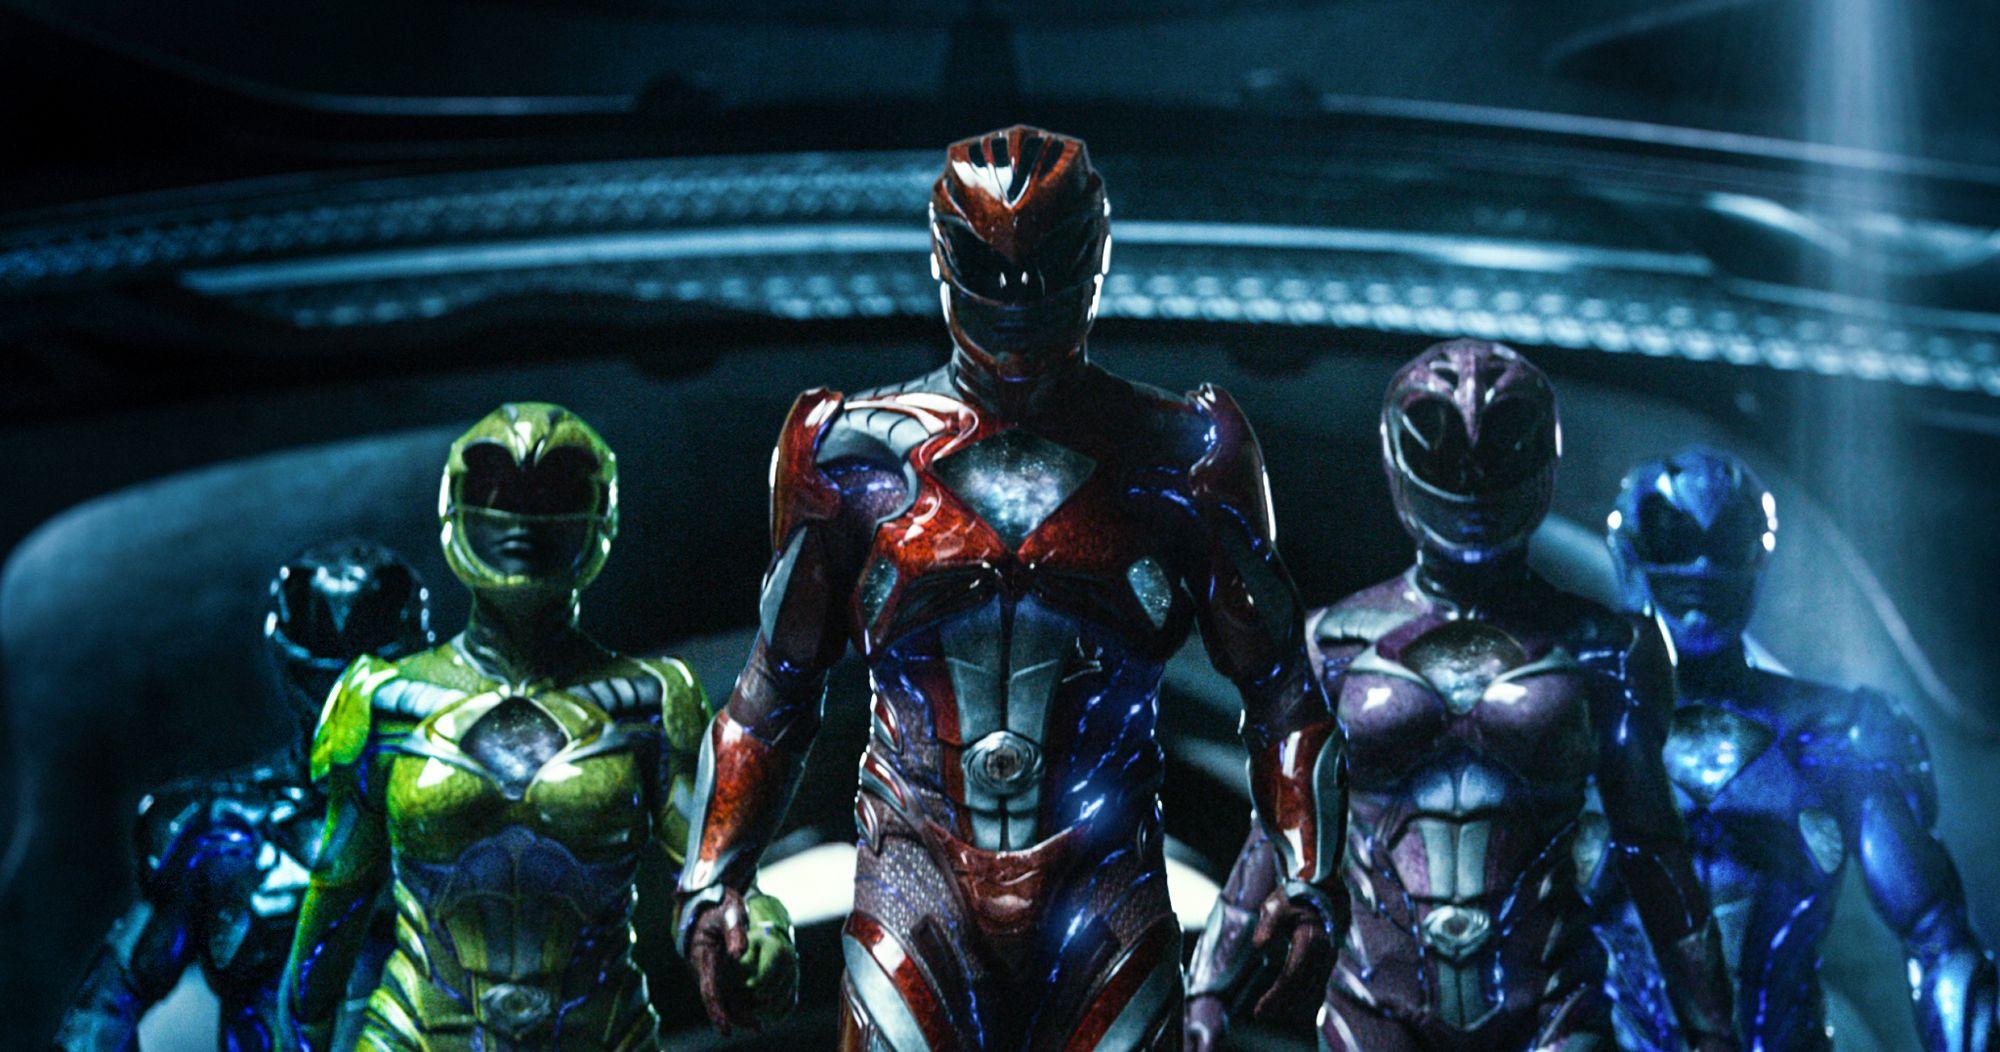 Power Rangers 364721 Gallery, Image, Posters, Wallpaper and Stills